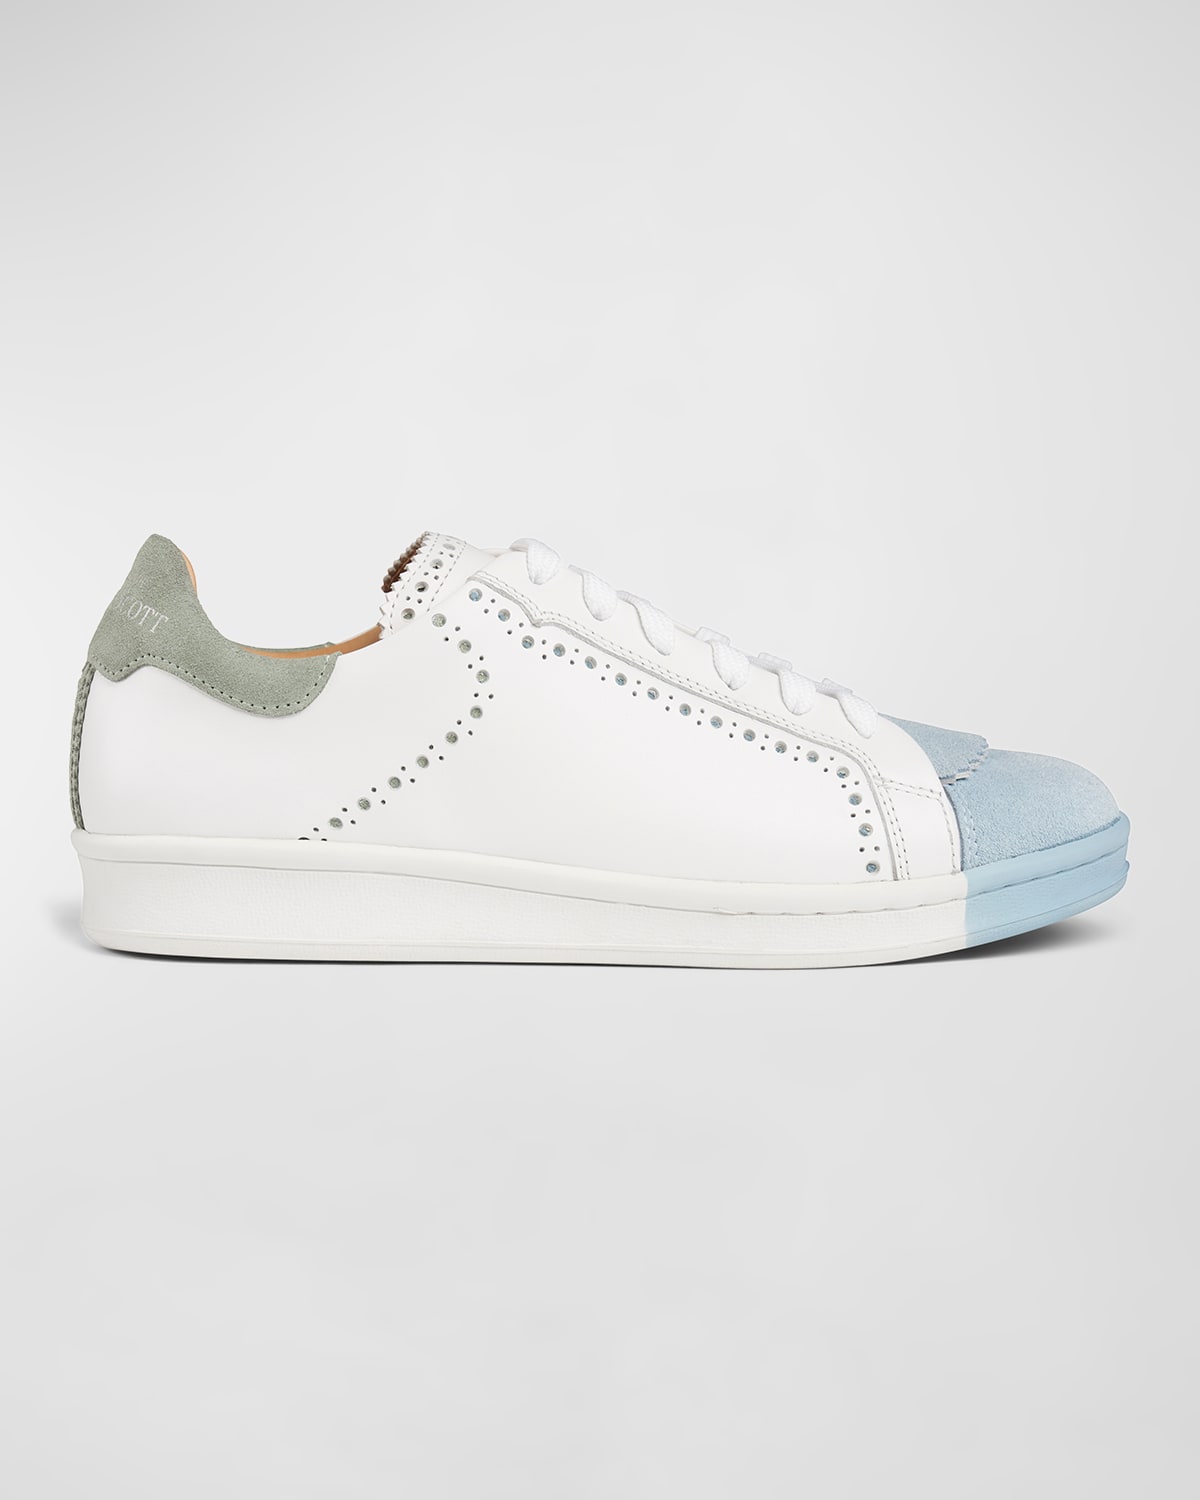 The Elliot Mixed Leather Low-Top Sneakers